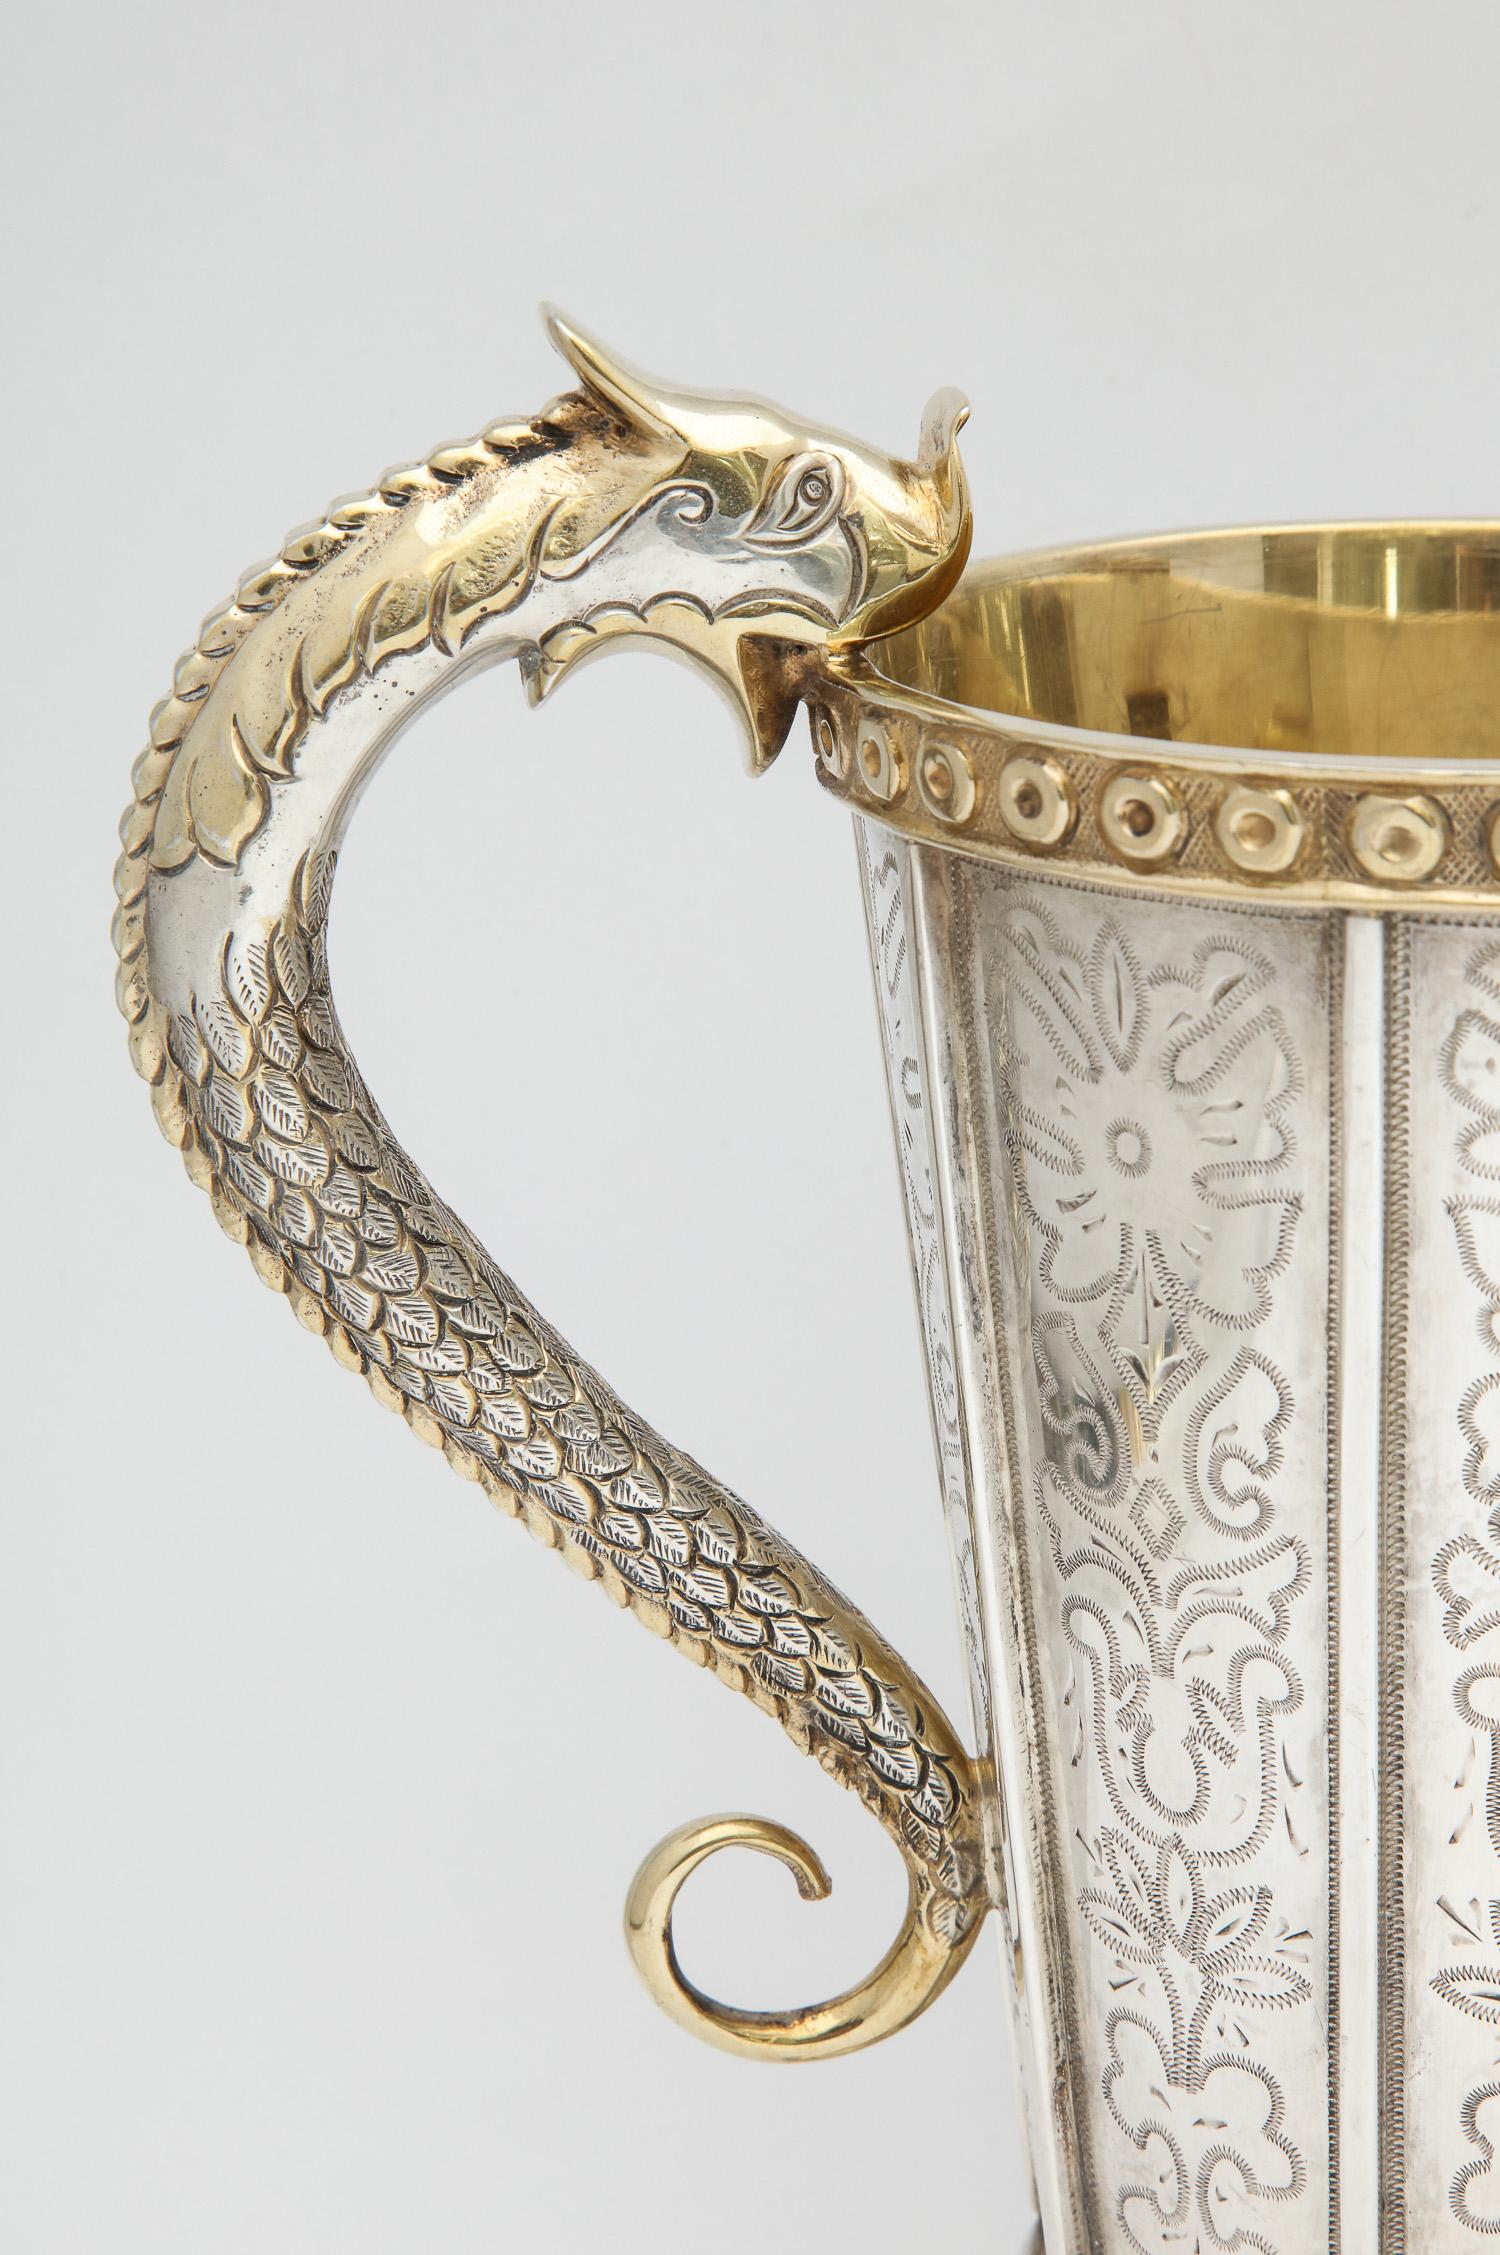 Quetzalcoatl-Inspired Sterling Silver Gilt Pitcher by Tane 5